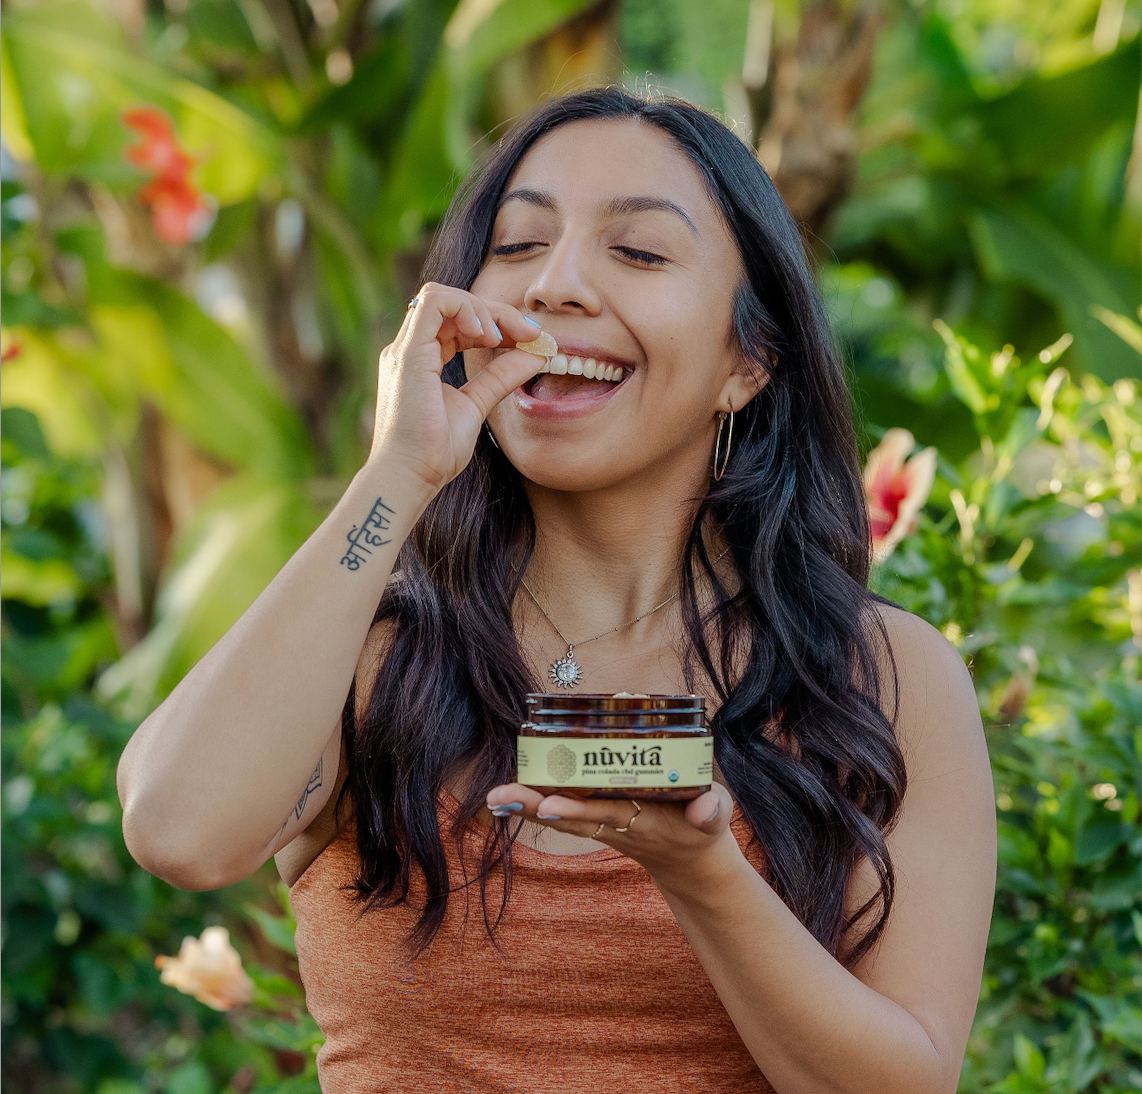 What Are the Benefits of Taking CBD Daily?